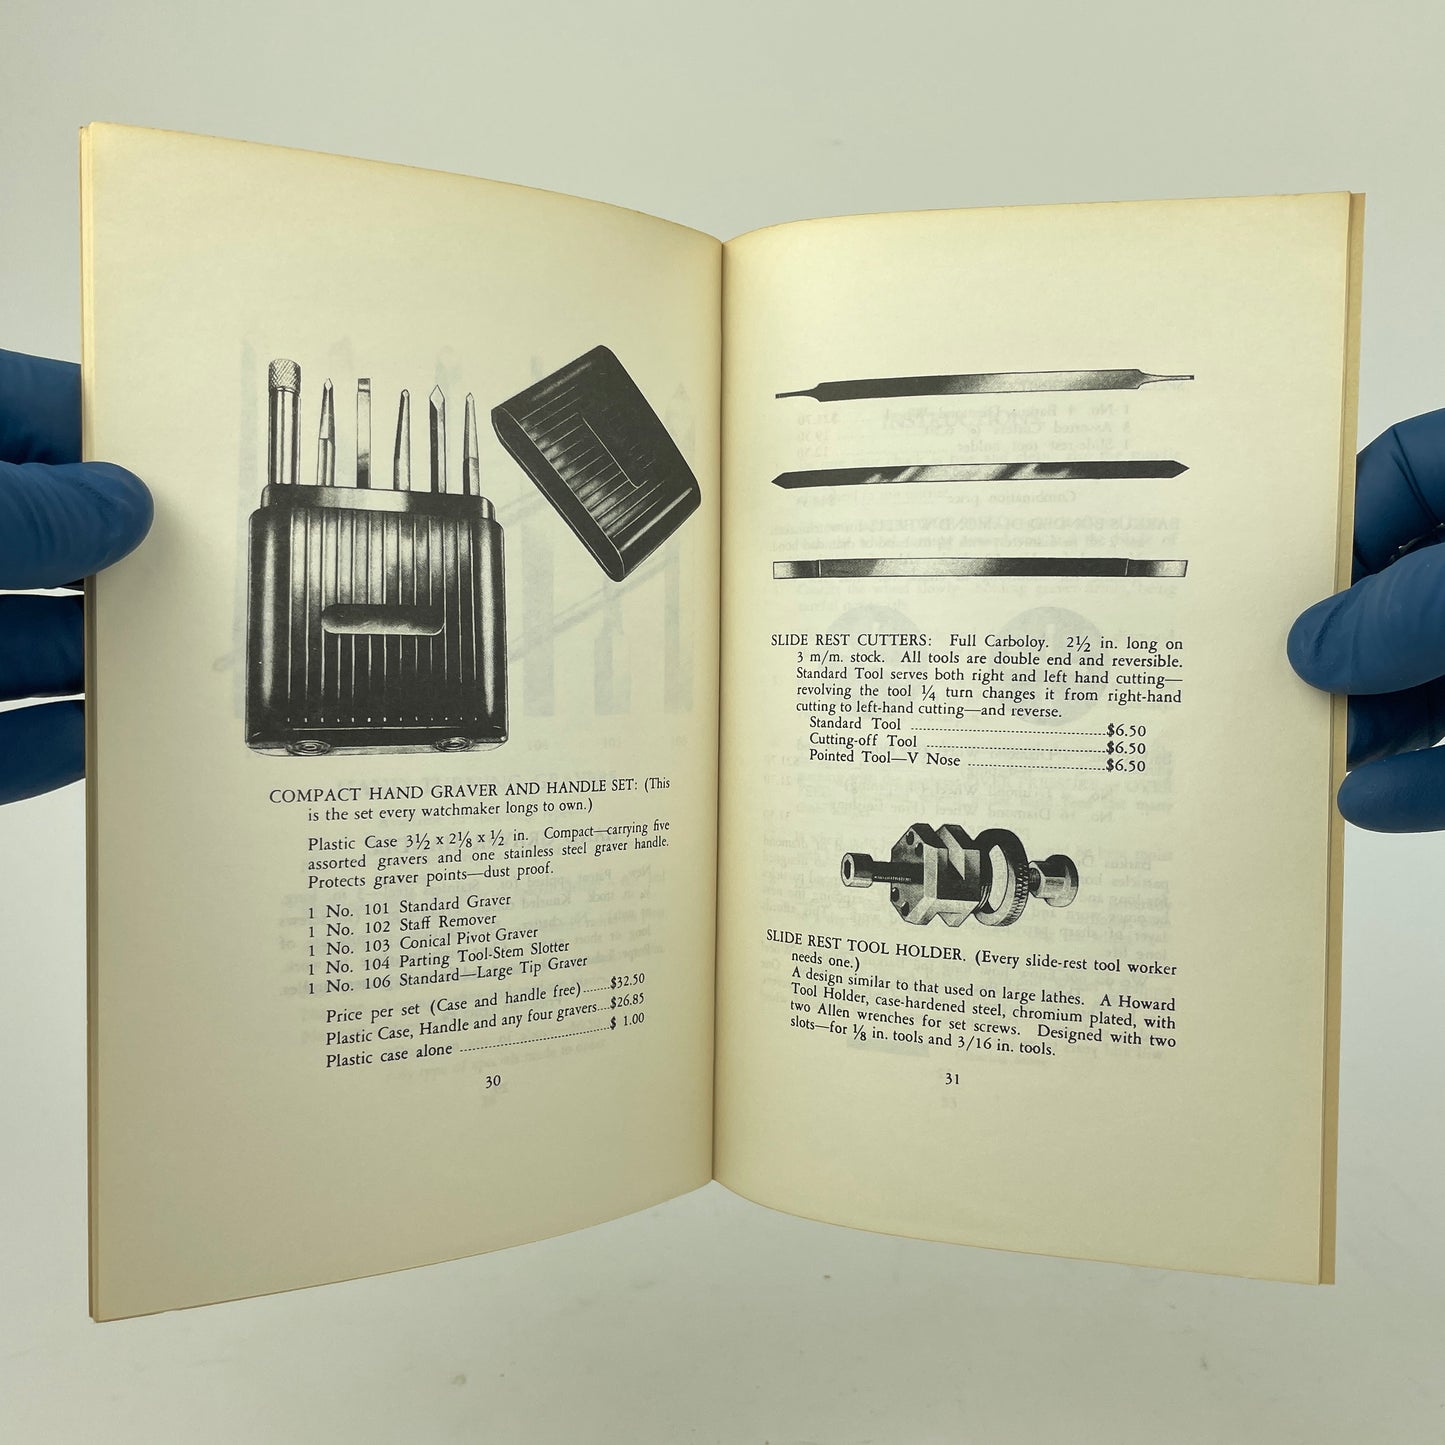 Mar Lot 52- Proper Use of the Watchmaker's Graver Manual